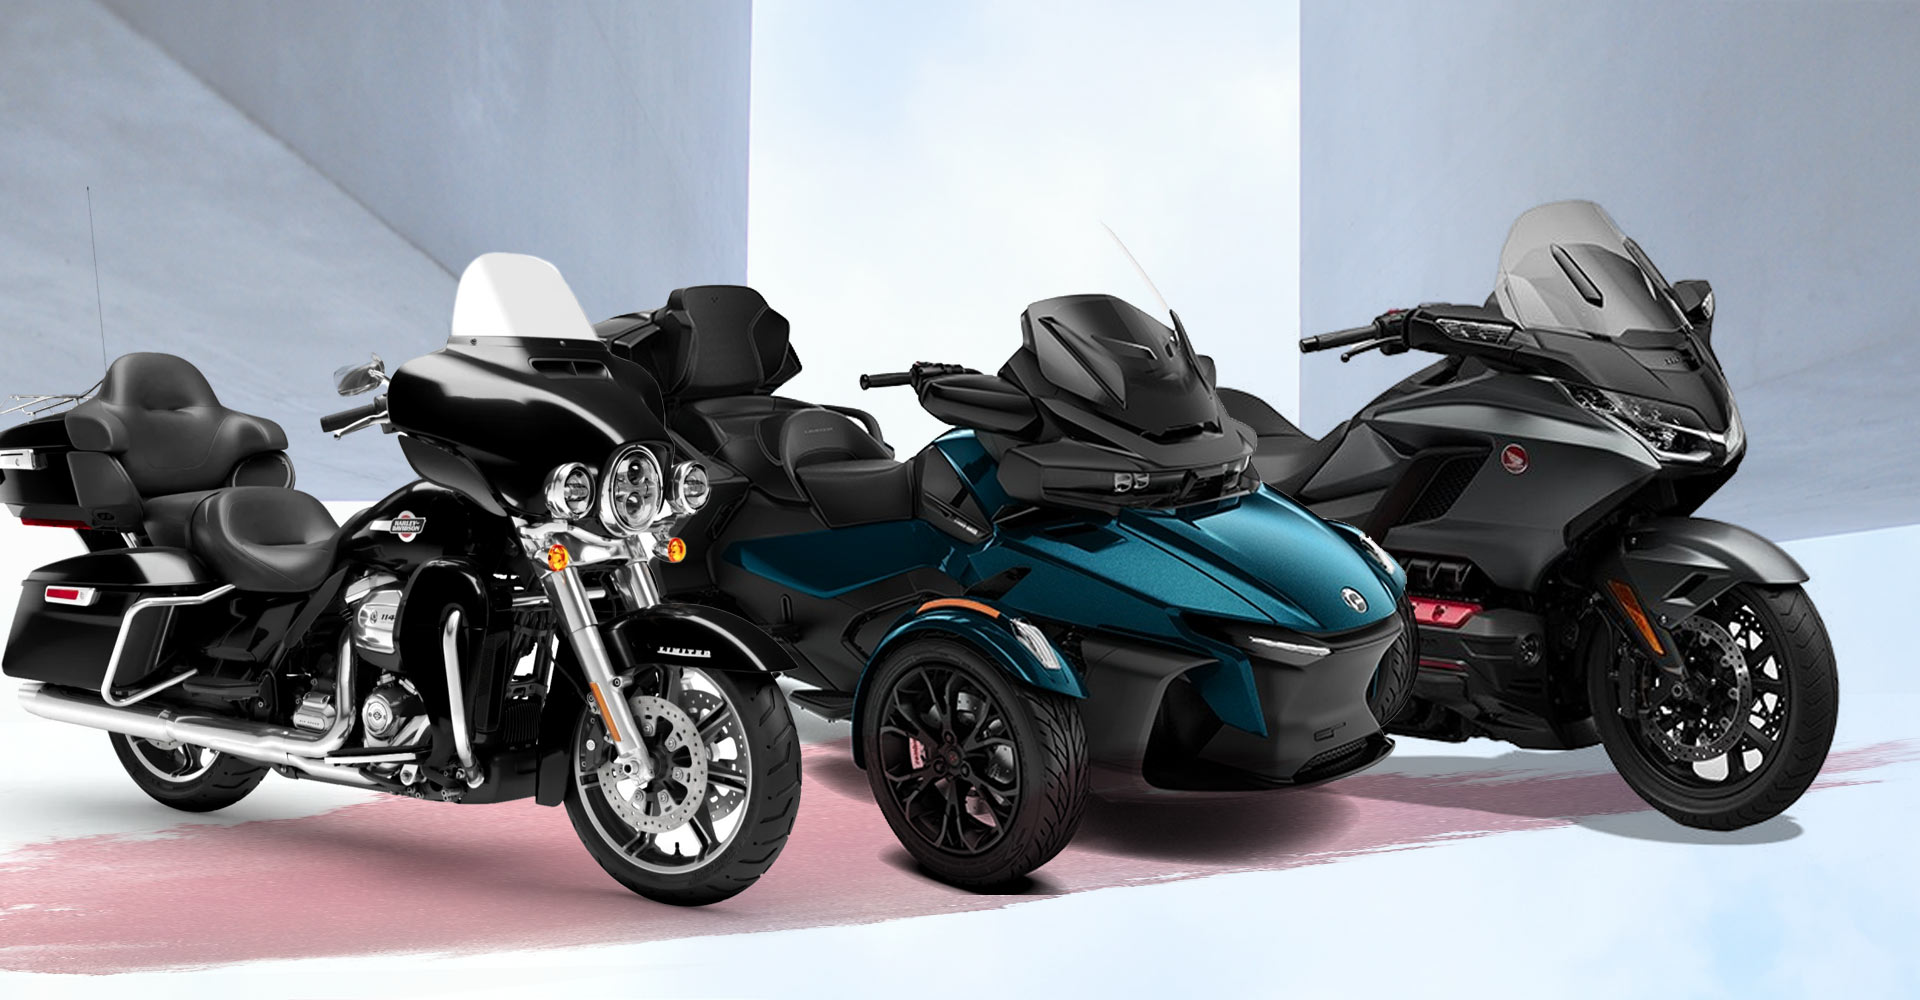 The Best Touring Motorcycles for 2023